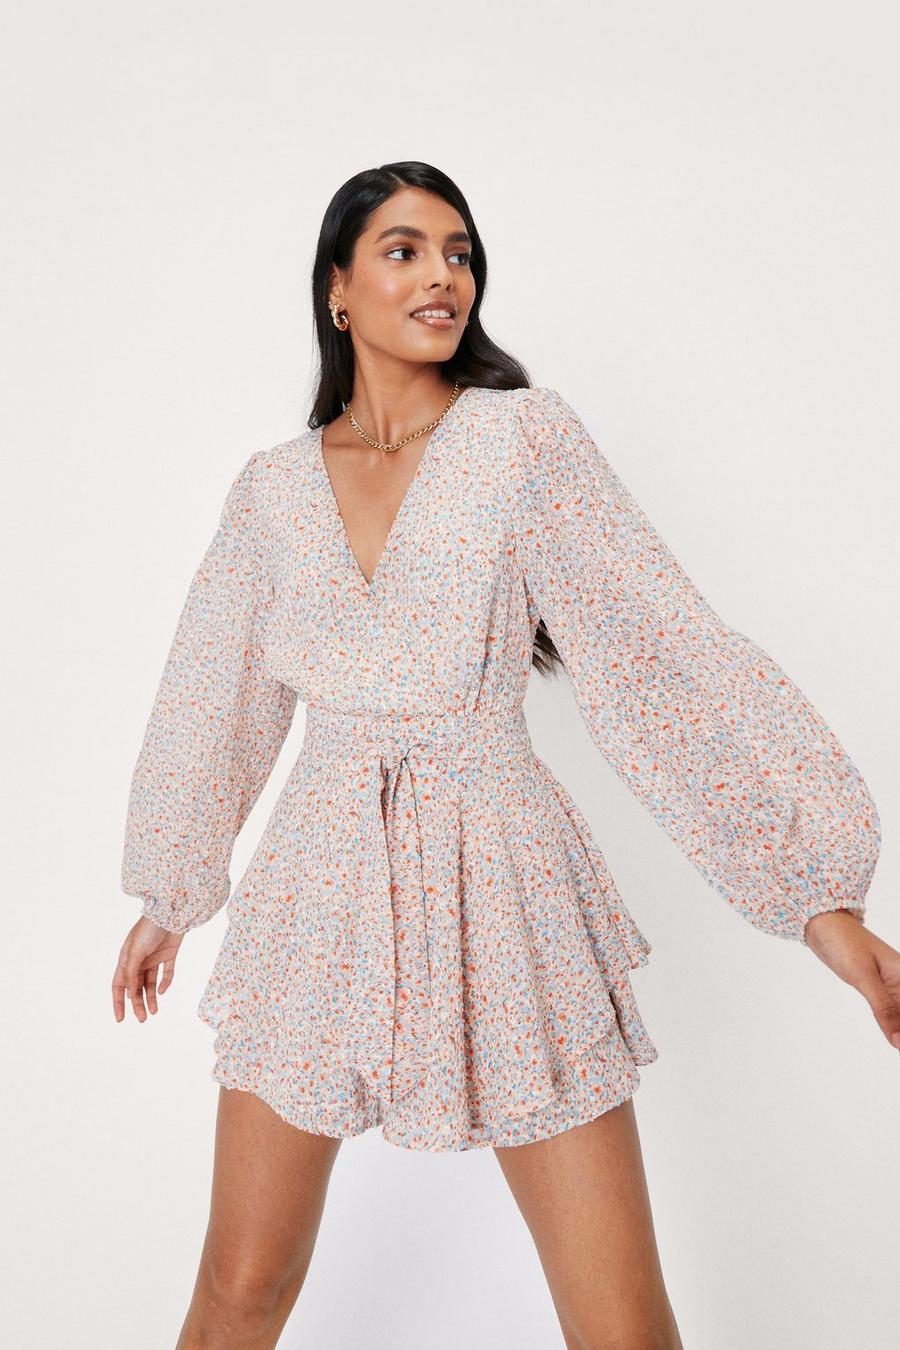 Chiffon Ditsy Floral Print Belted Romper